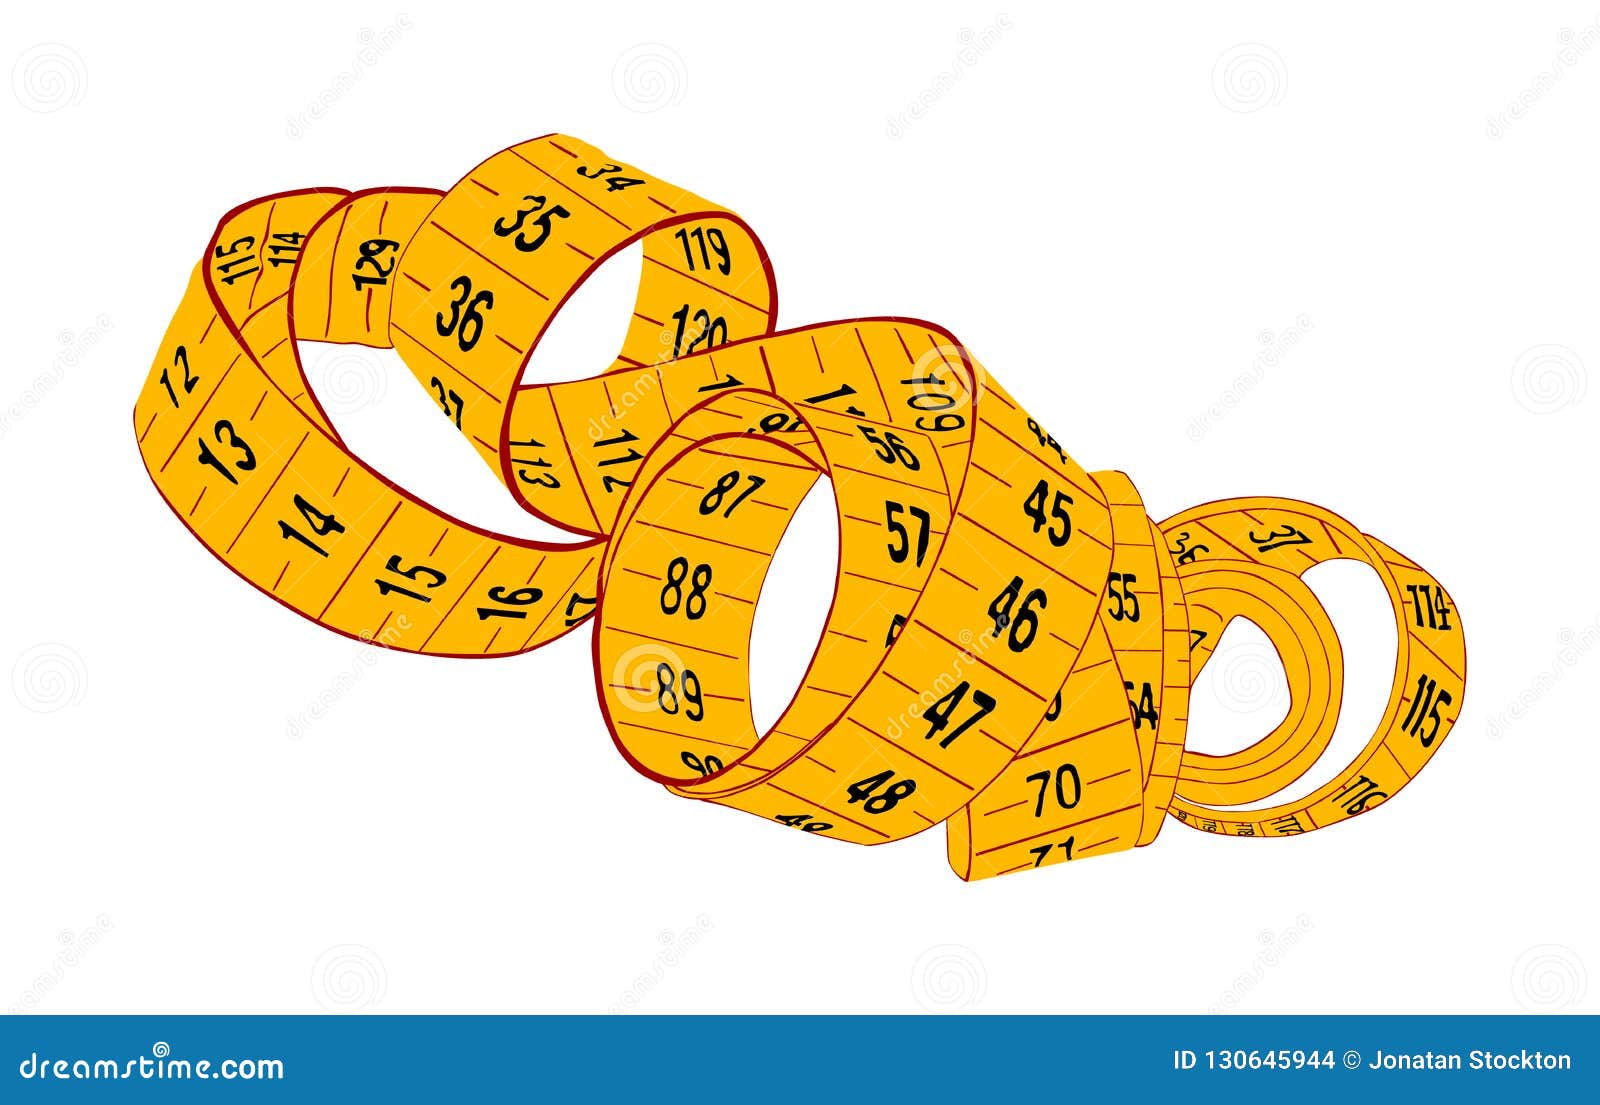 https://thumbs.dreamstime.com/z/yellow-measuring-tape-vector-isolated-white-background-spiral-fashion-tape-measure-vector-illustration-construction-tool-yellow-130645944.jpg